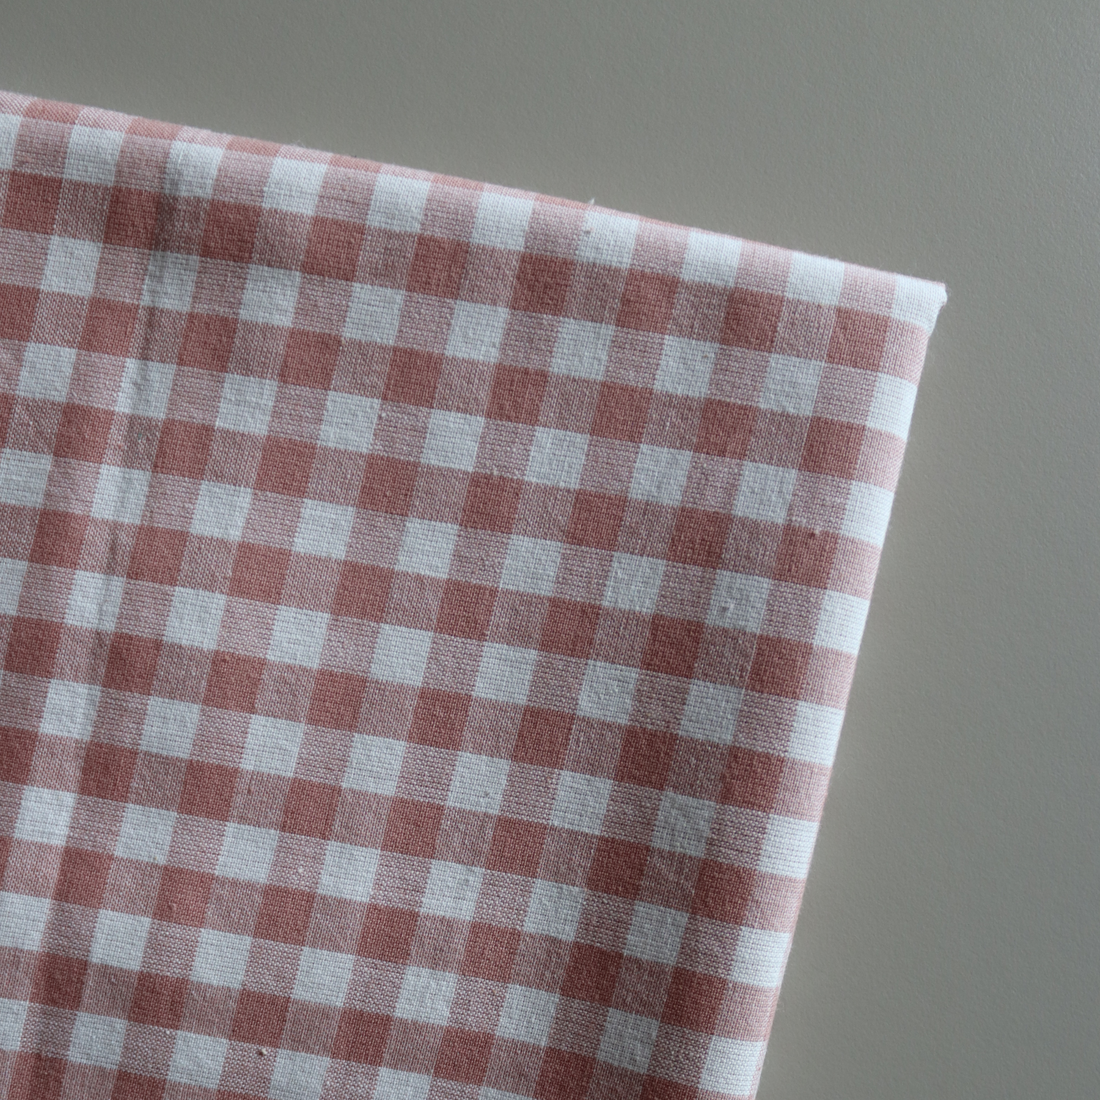 Rosa - Small Check Gingham - Cotton Fabric